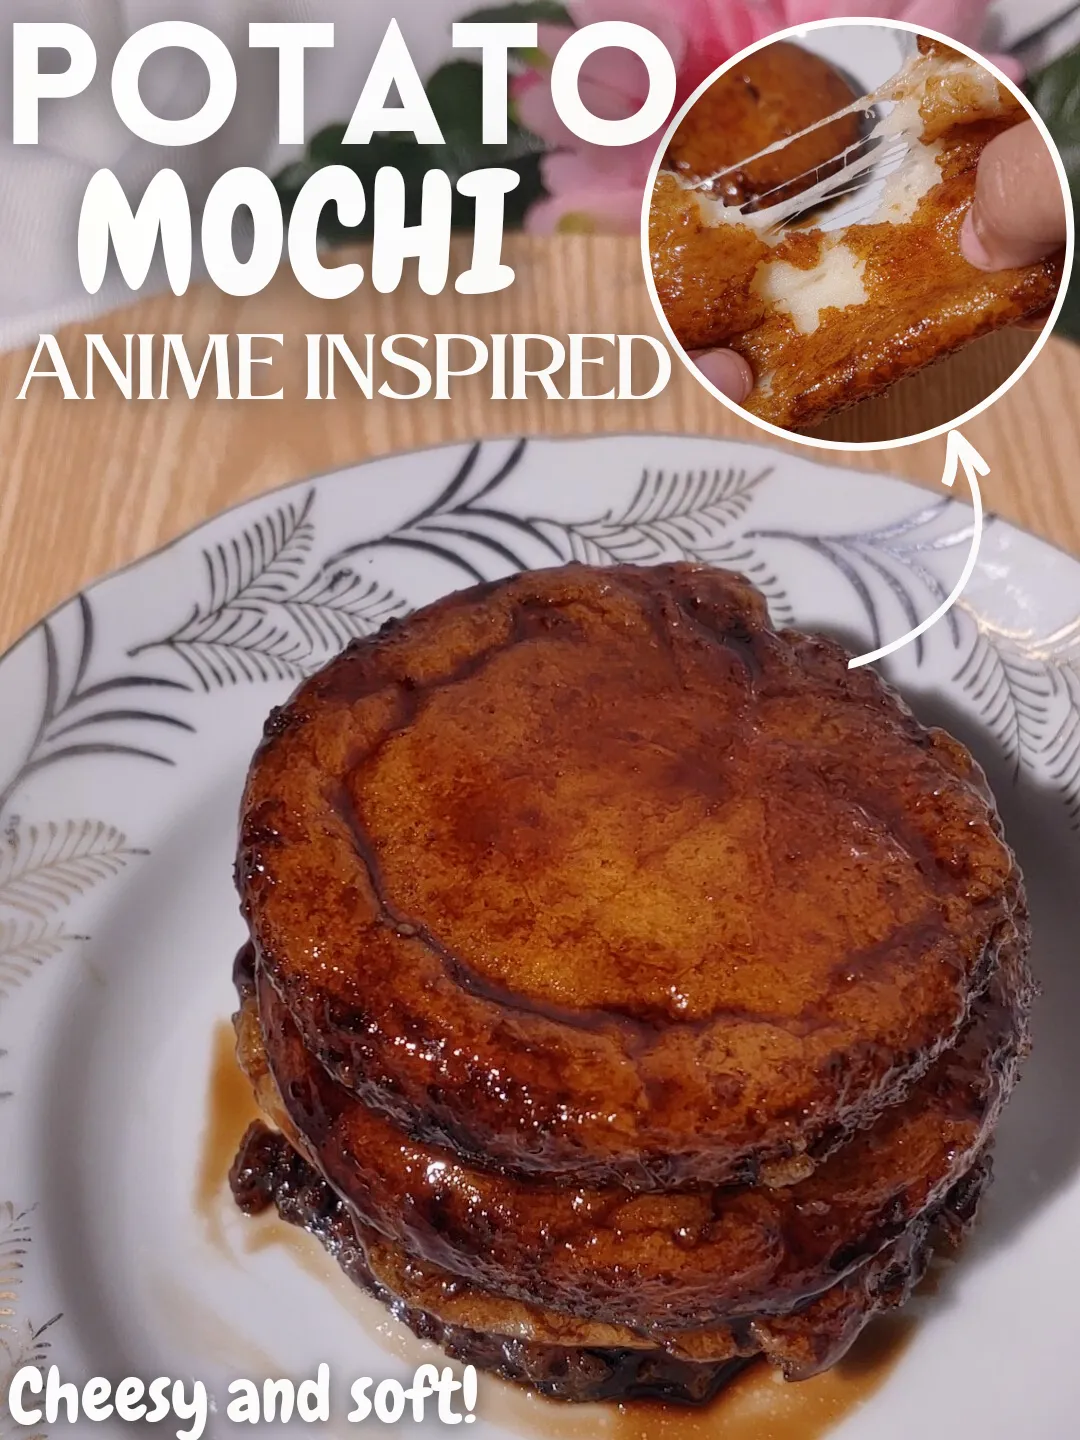 How to Make the Fried Potato Mochi from Demon Slayer